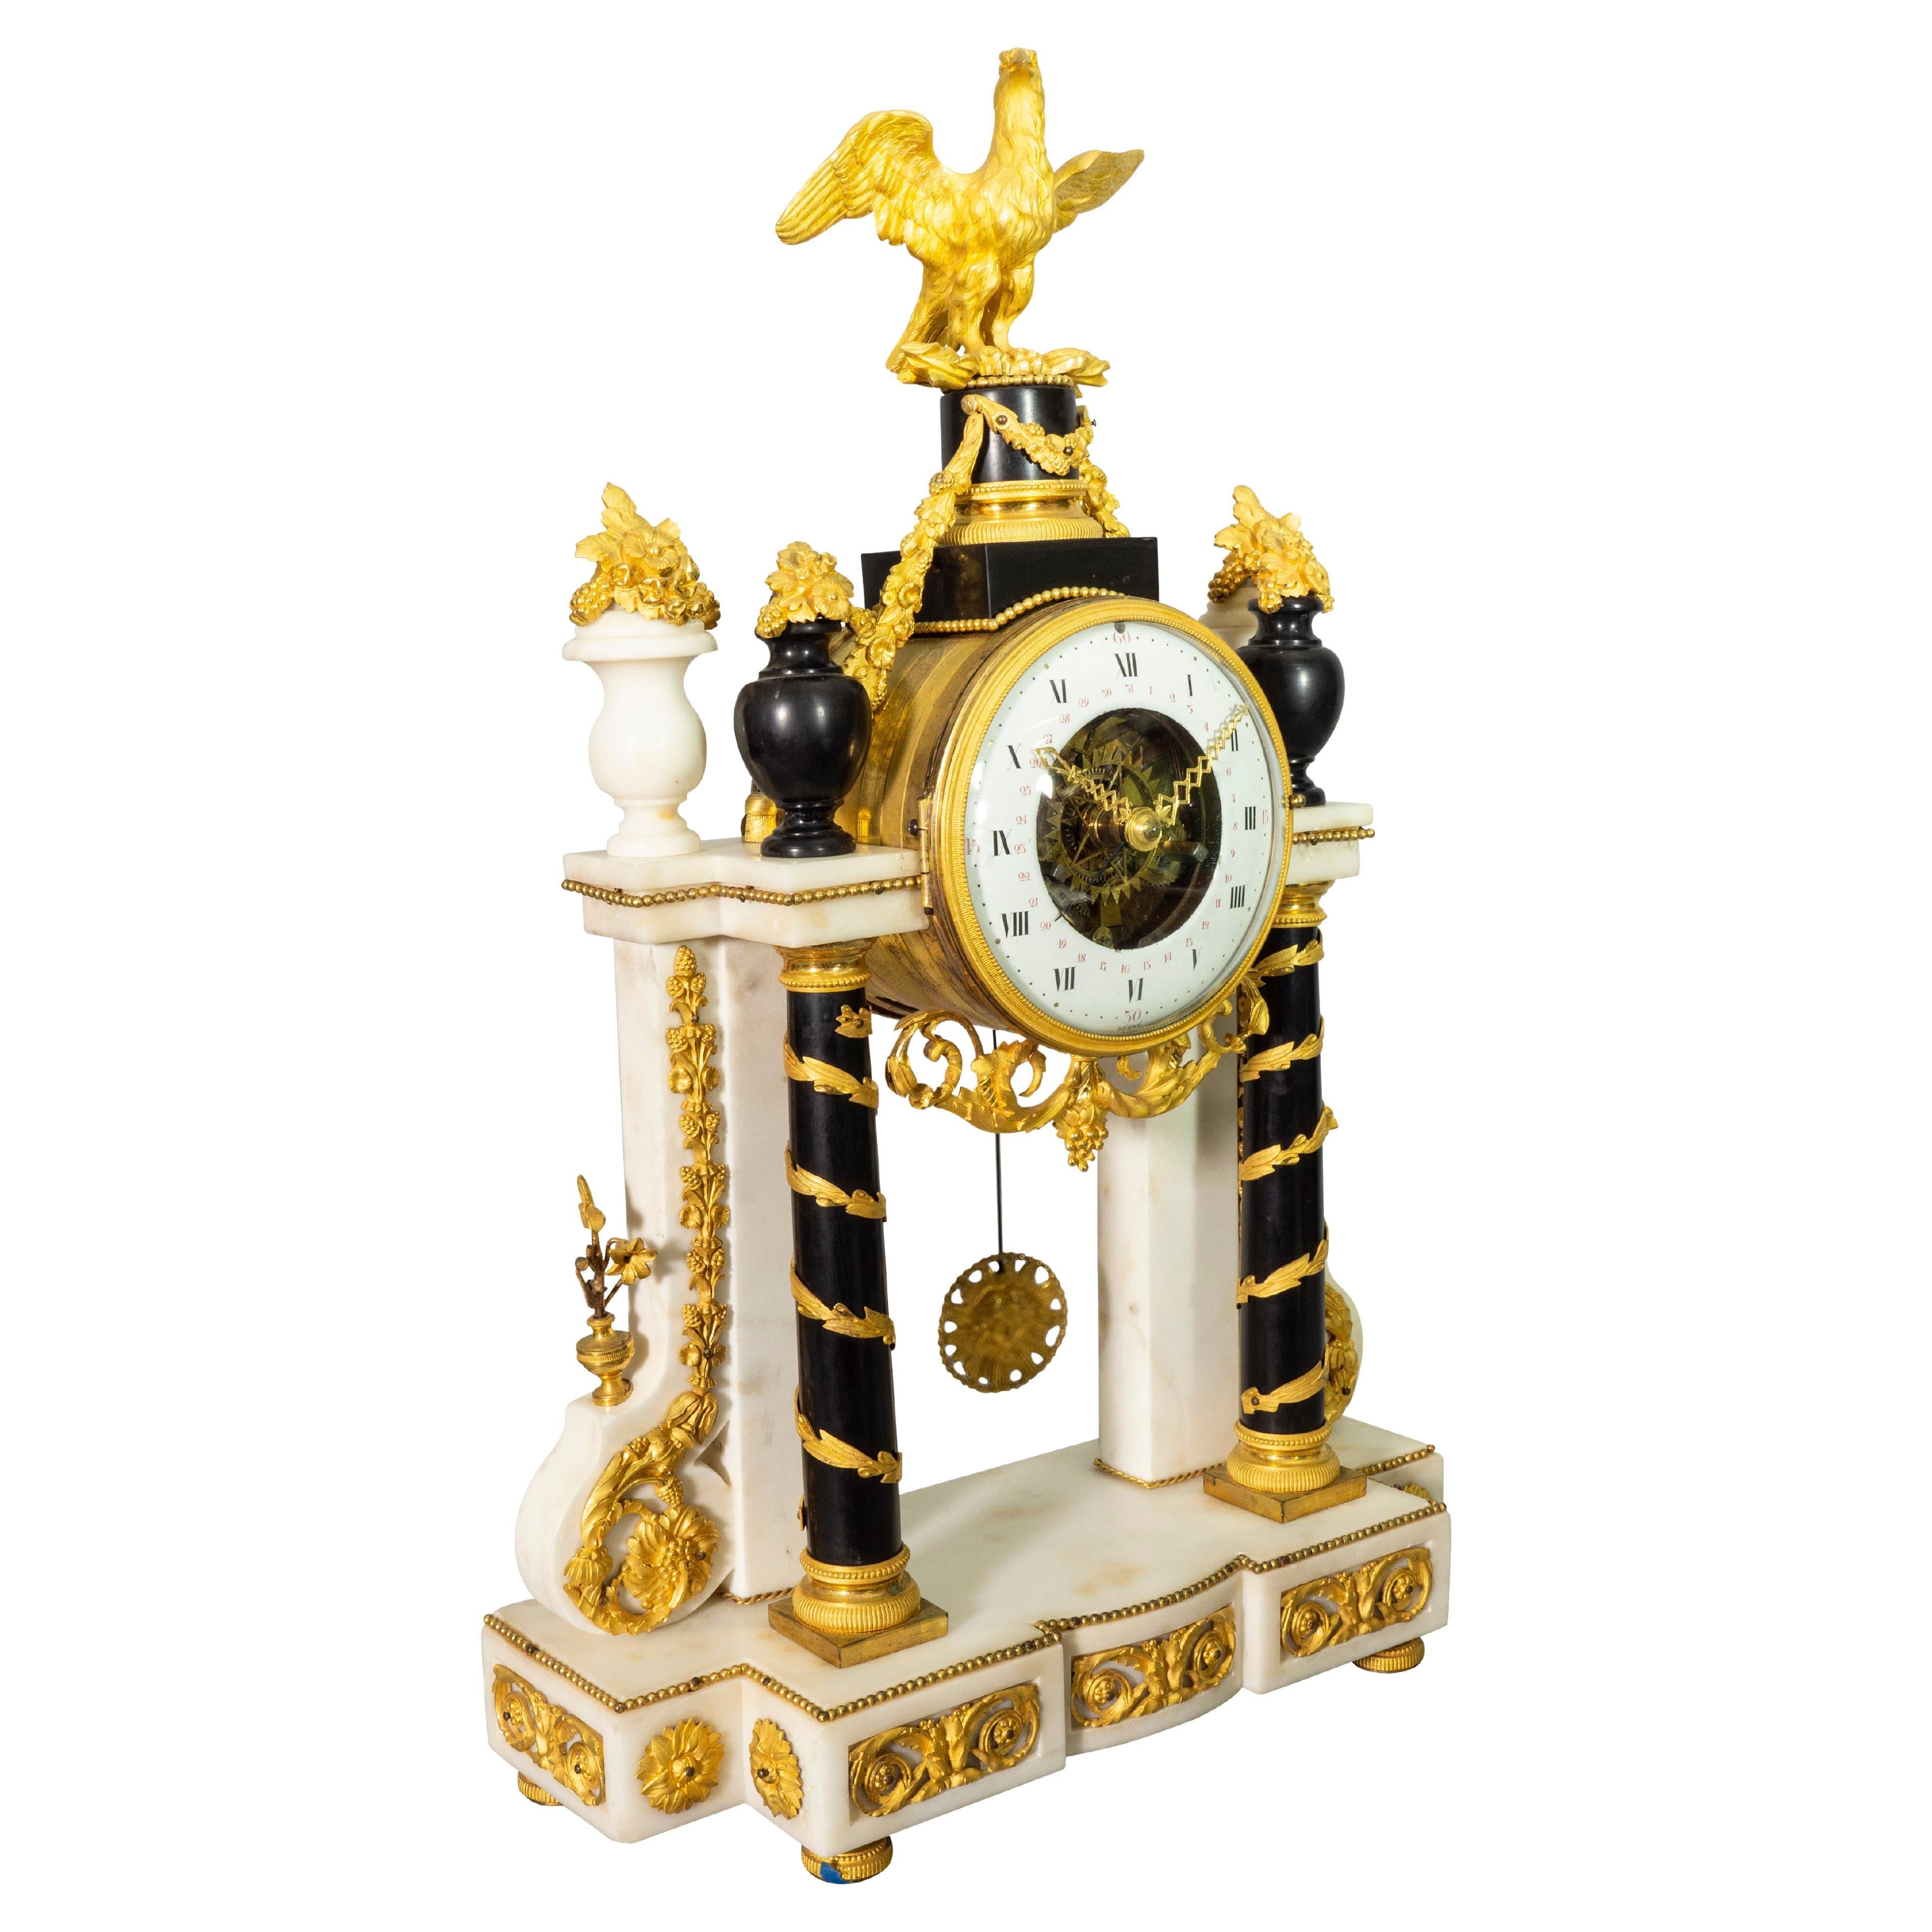 In fine condition with eagle finial over an enameled clock dial signed Degre, a fine Paris maker listed in Tardys book of French clockmakers. Flanked by two pairs of urns one white marble and the other black over marble columns wrapped in spiraling